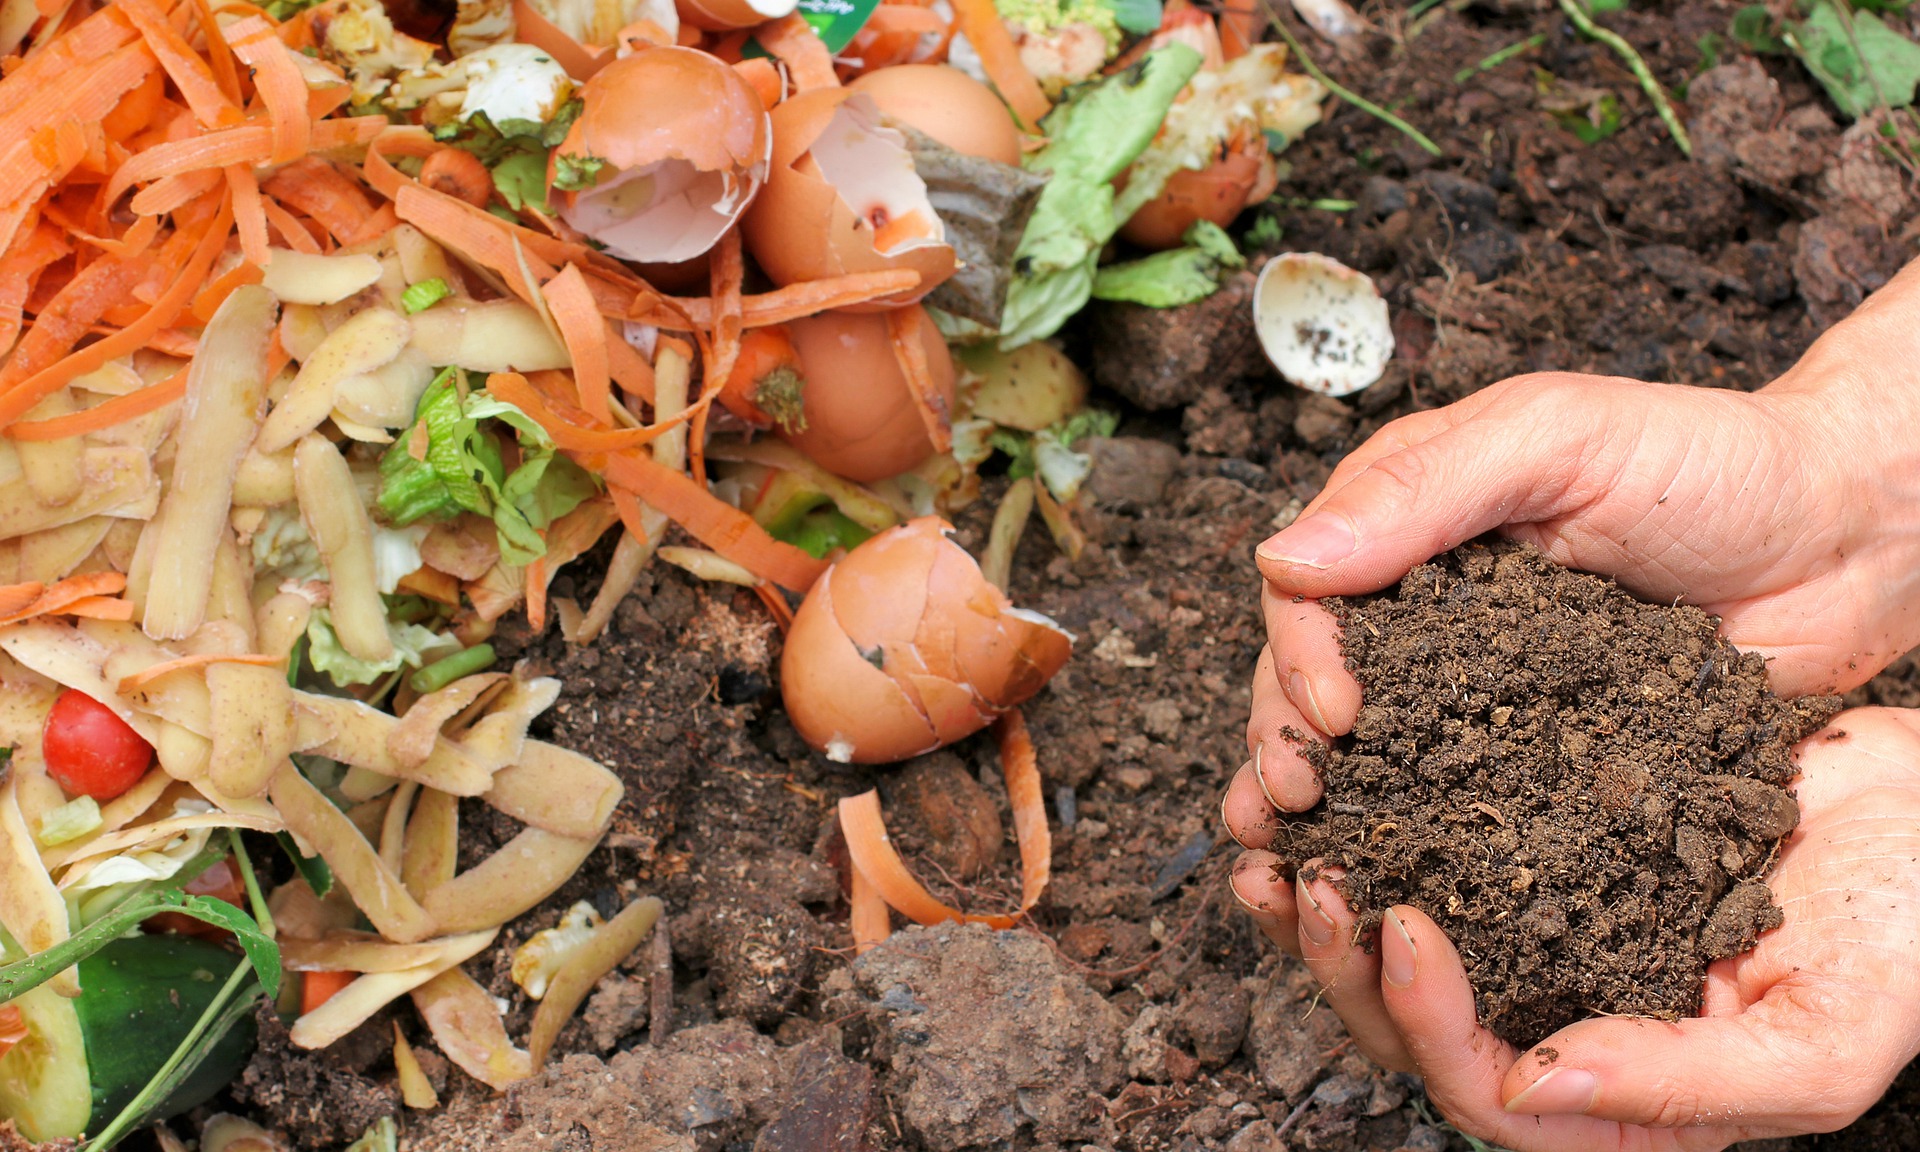 compost-g64c6a84be_1920.jpg